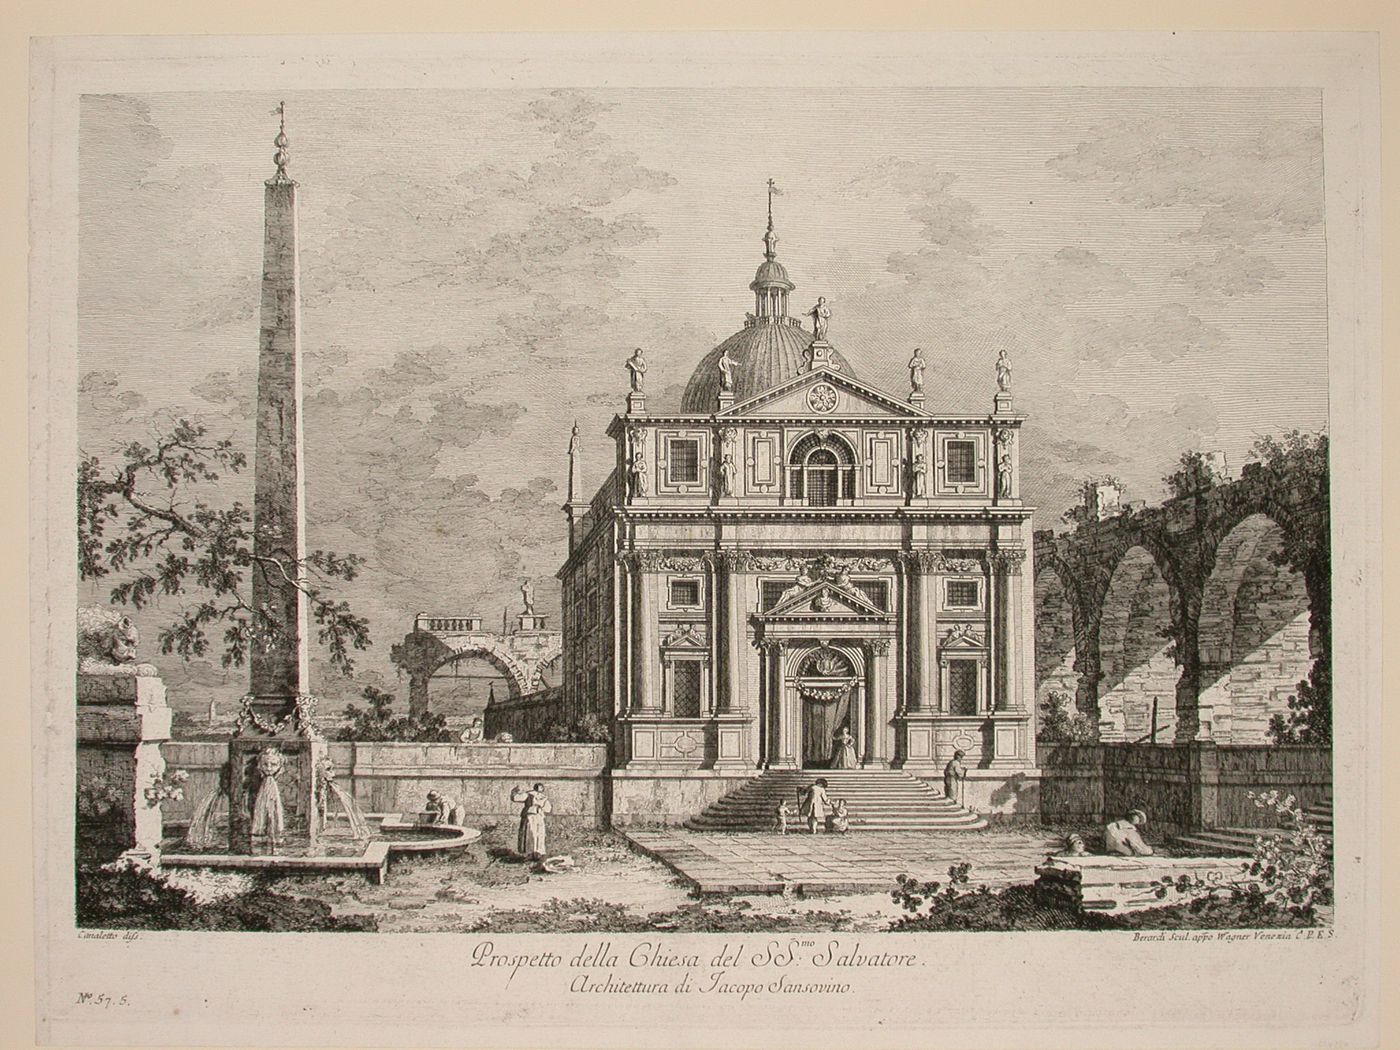 A view of the church of San Salvatore, Venice